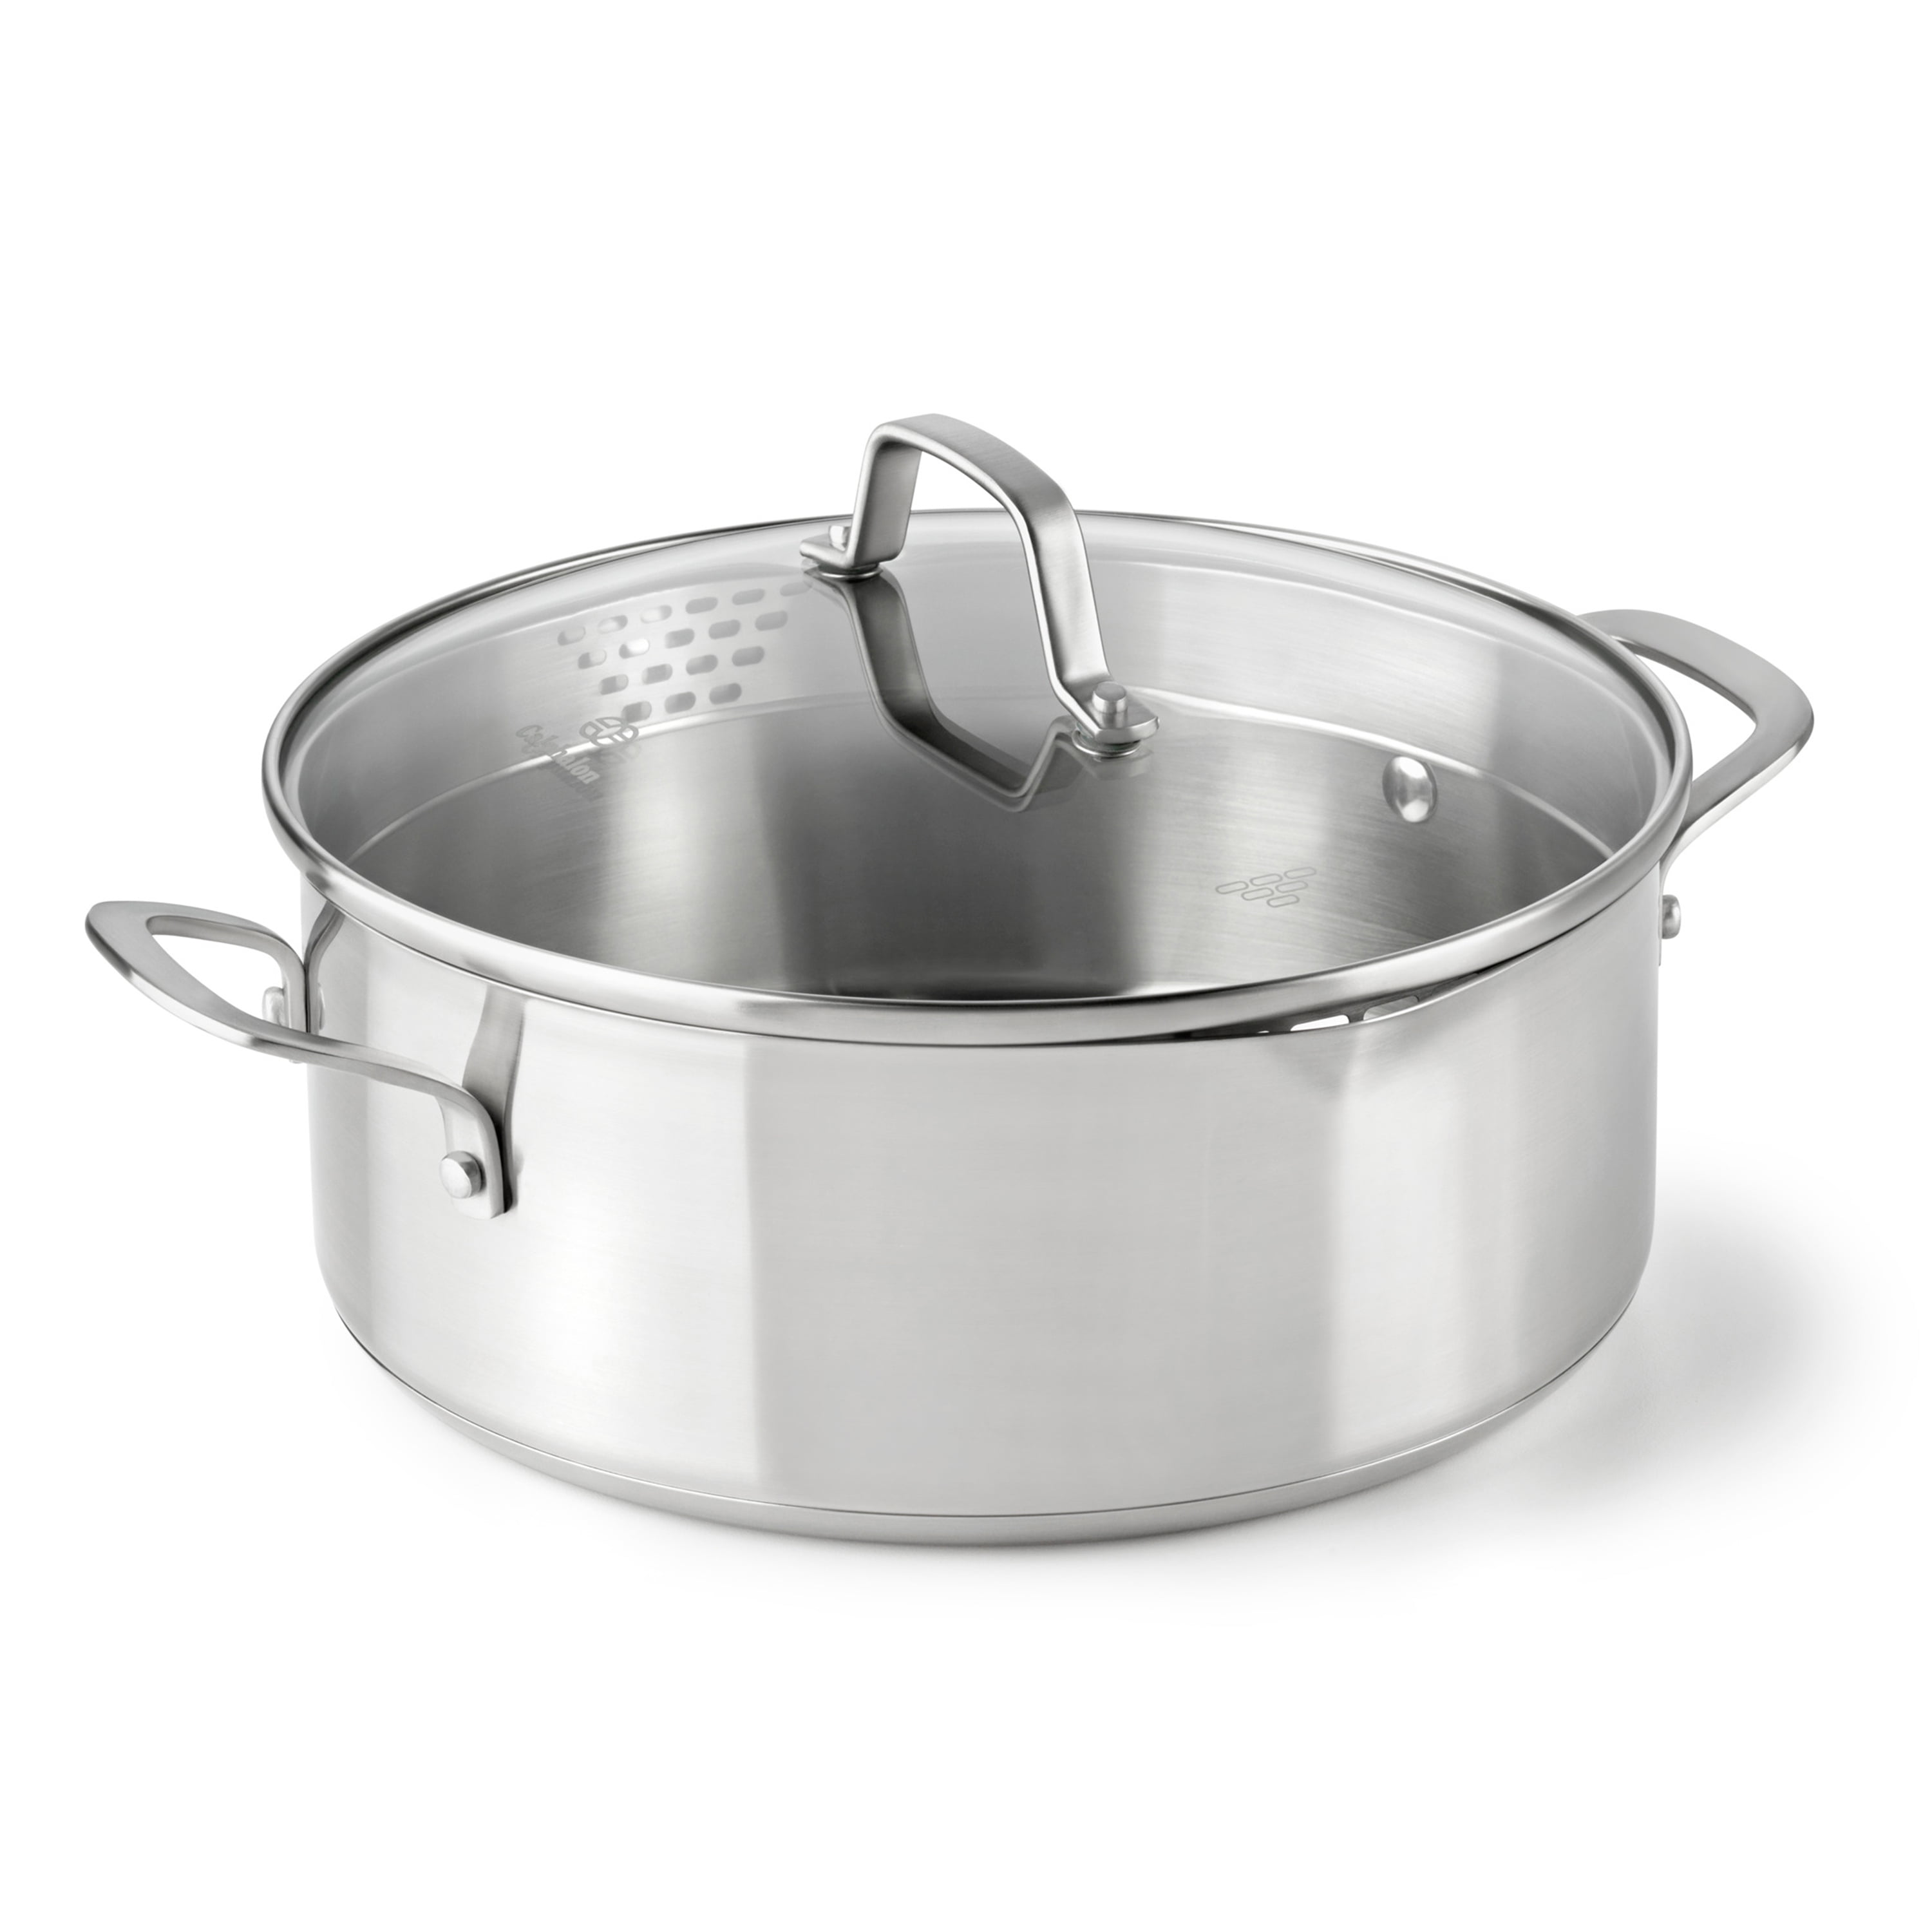 NEW Calphalon Tri-Ply Stainless Steel 5 Qt Dutch Oven 